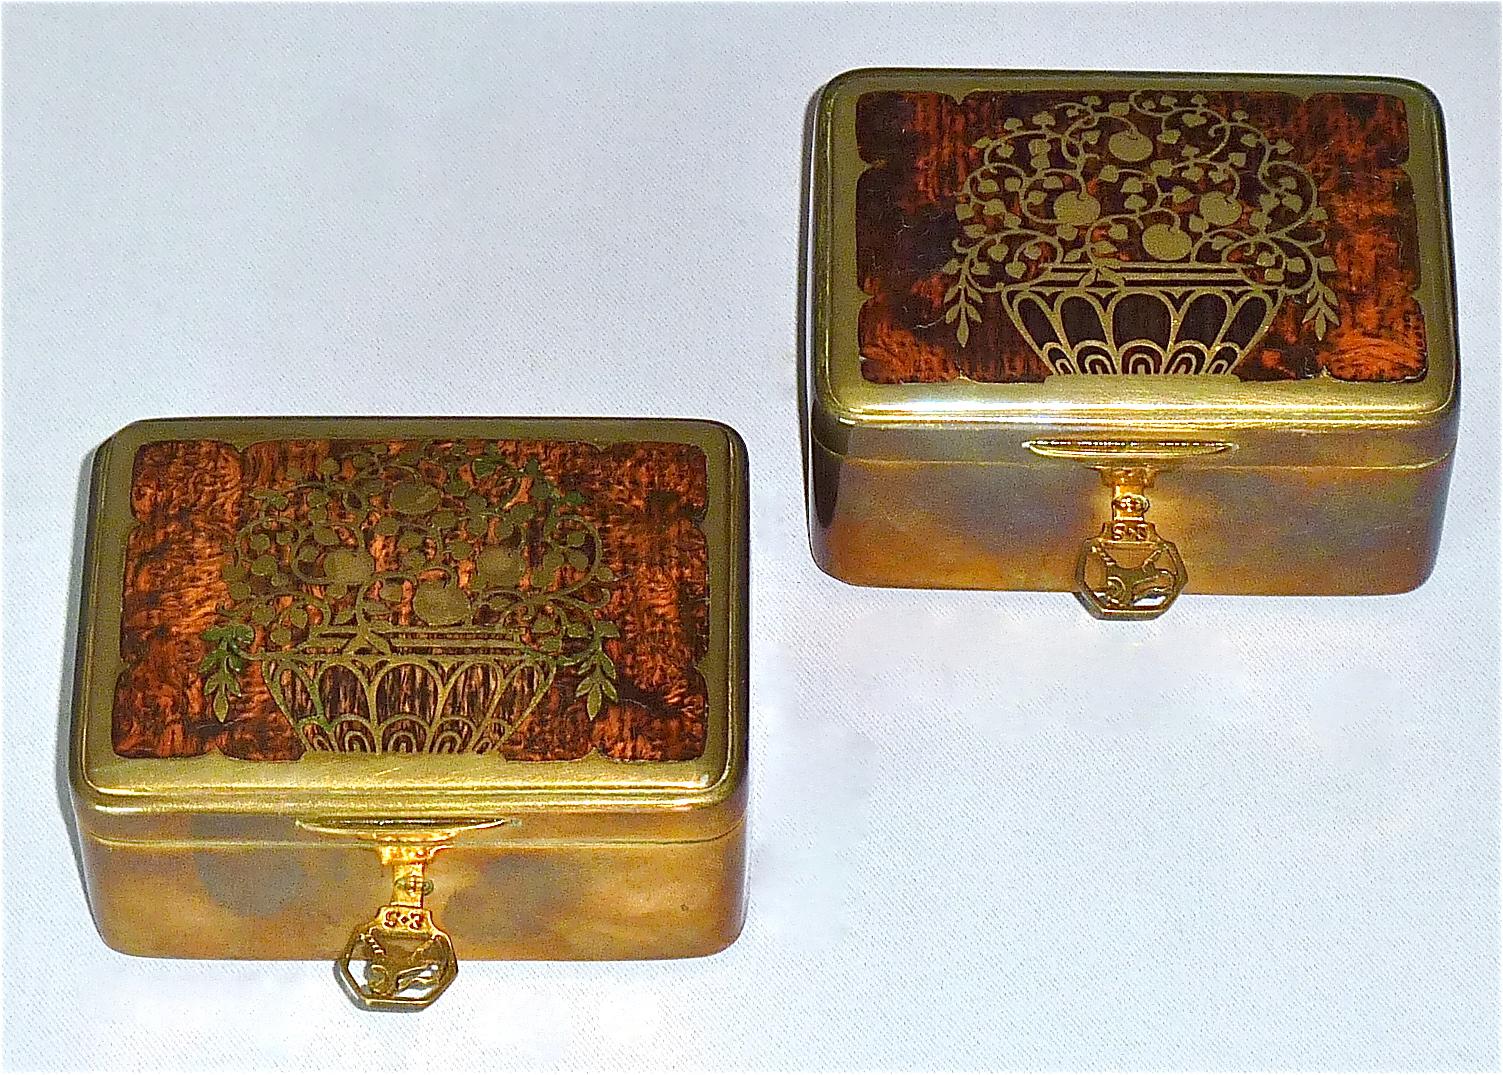 Fine and rare pair Jugendstil / Art Nouveau / Secession / Arts & Crafts Erhard & Sohne trinket boxes / jewelry caskets with amazing inlaid wood veneer and patinated brass showing fruit baskets and floral leaf branch decoration, Germany circa 1900.